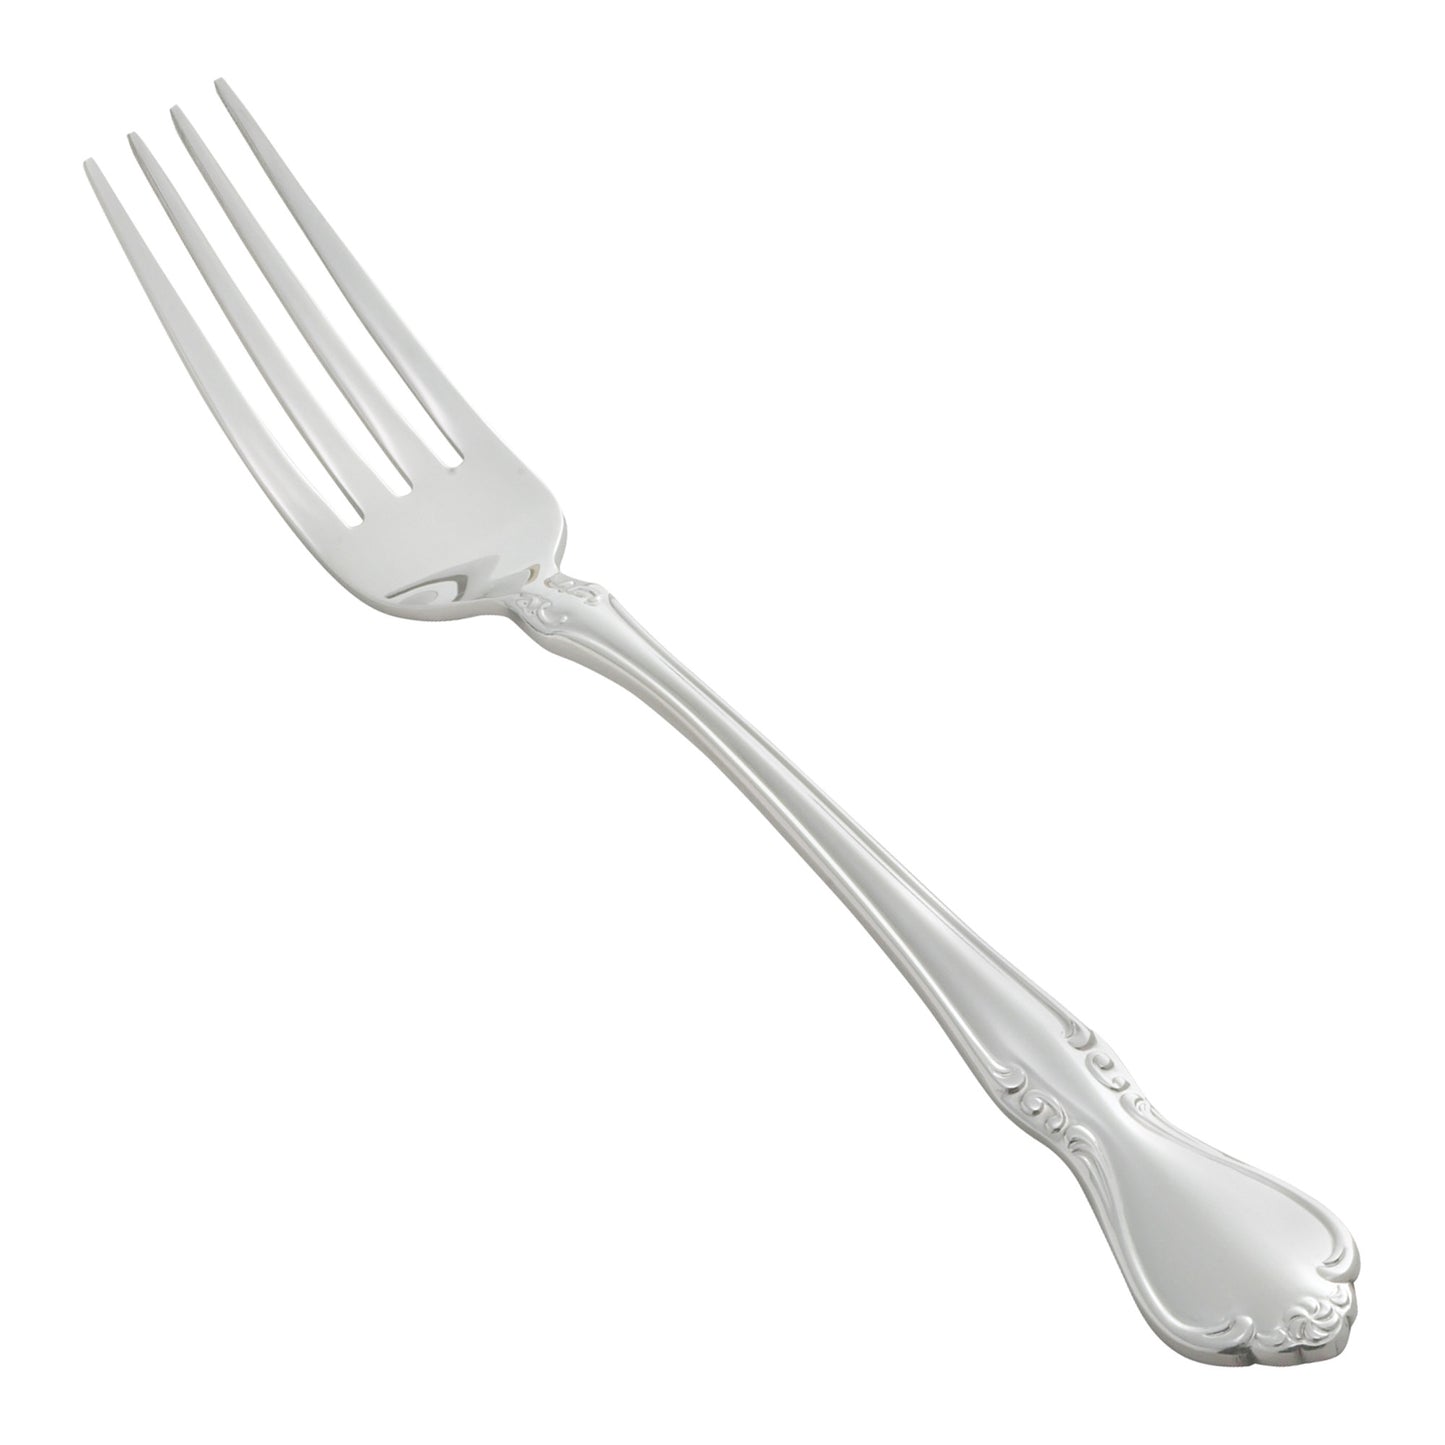 0039-11 - Chantelle Table Fork, 18/8 Extra Heavyweight